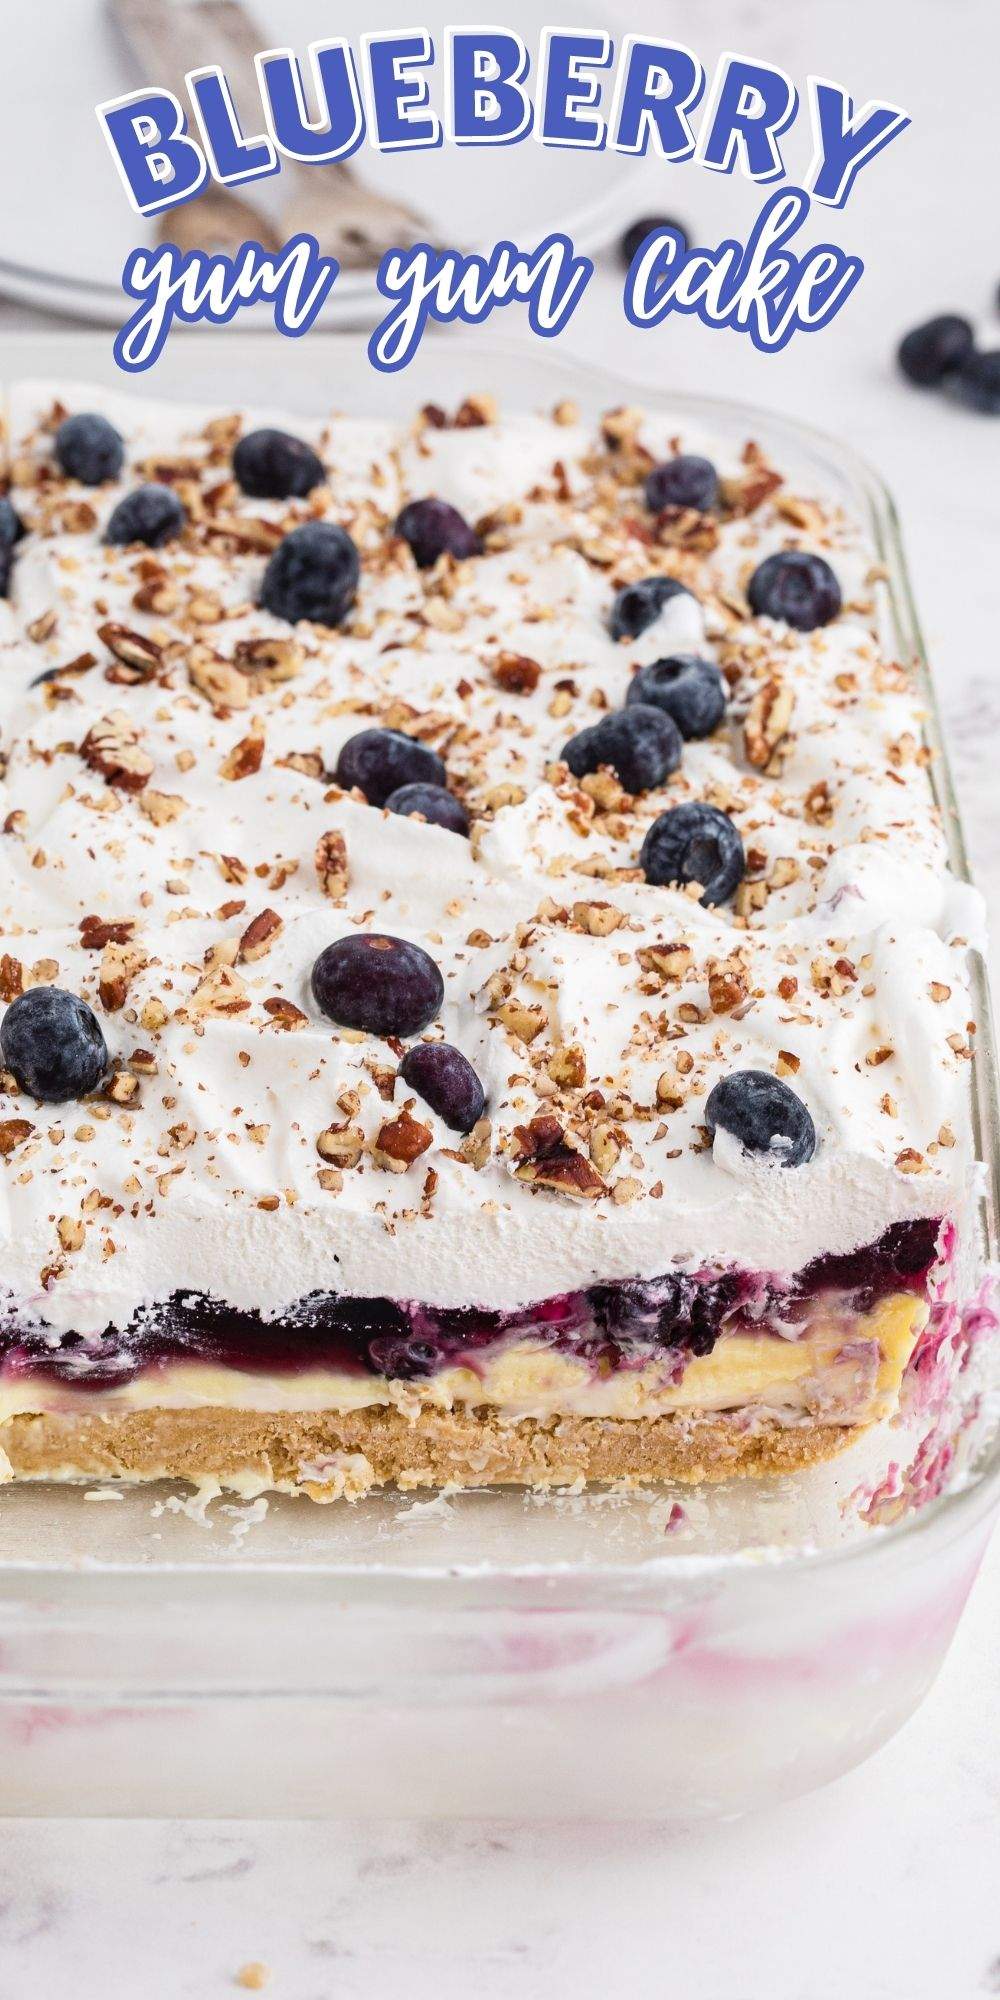 This Blueberry Yum Yum Cake is a refreshing layered cake dessert that’s perfect for a party, casual BBQ social or whenever you want a creamy dessert. via @familyfresh